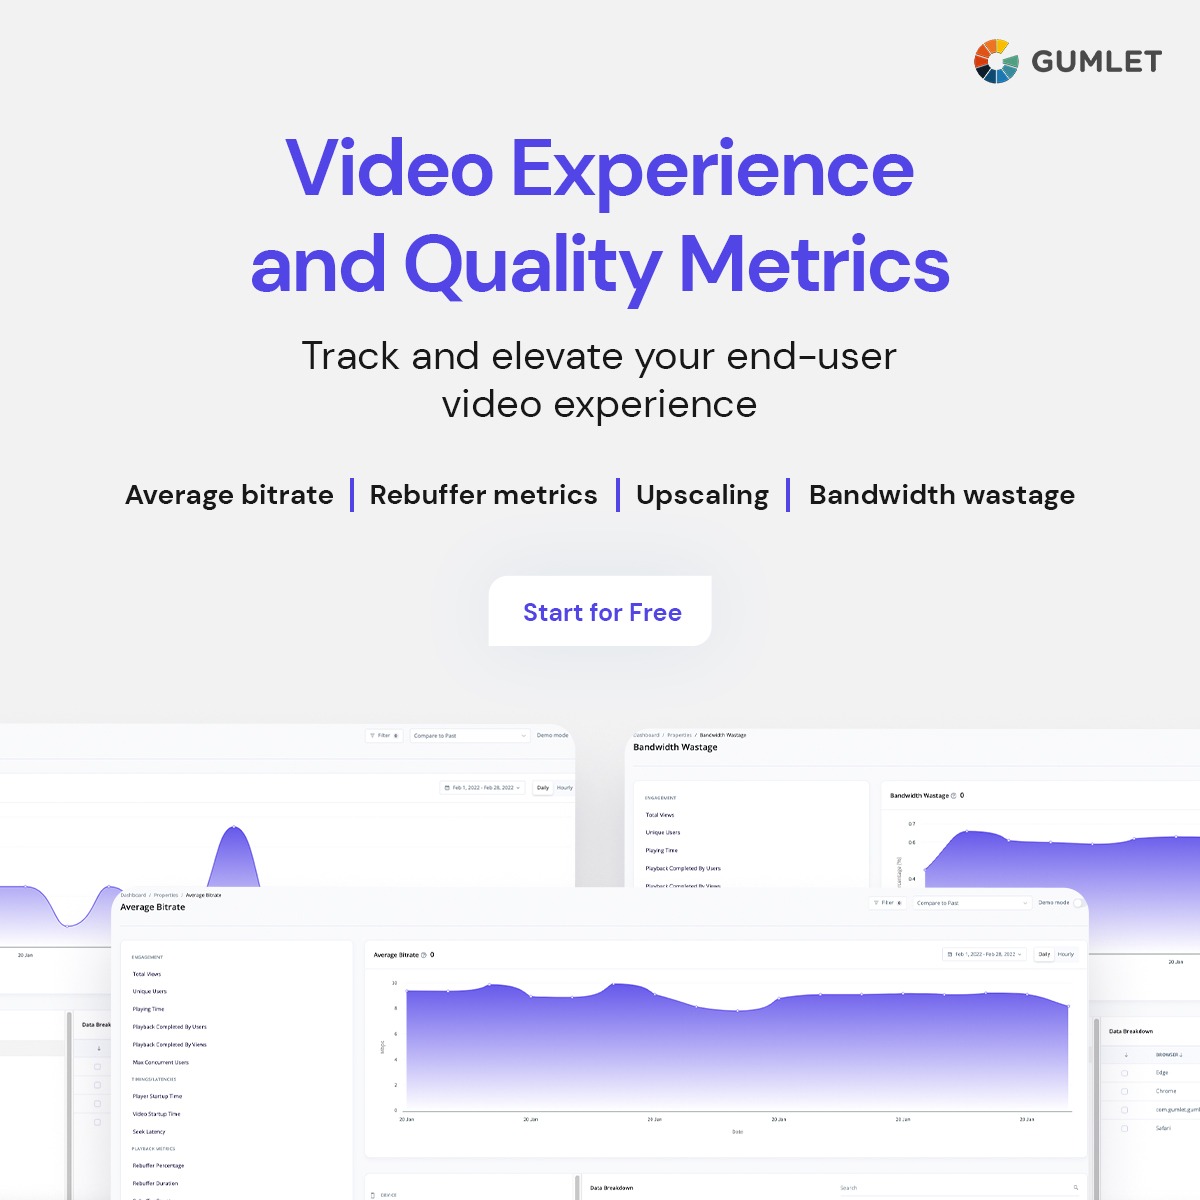 Gumlet video experience